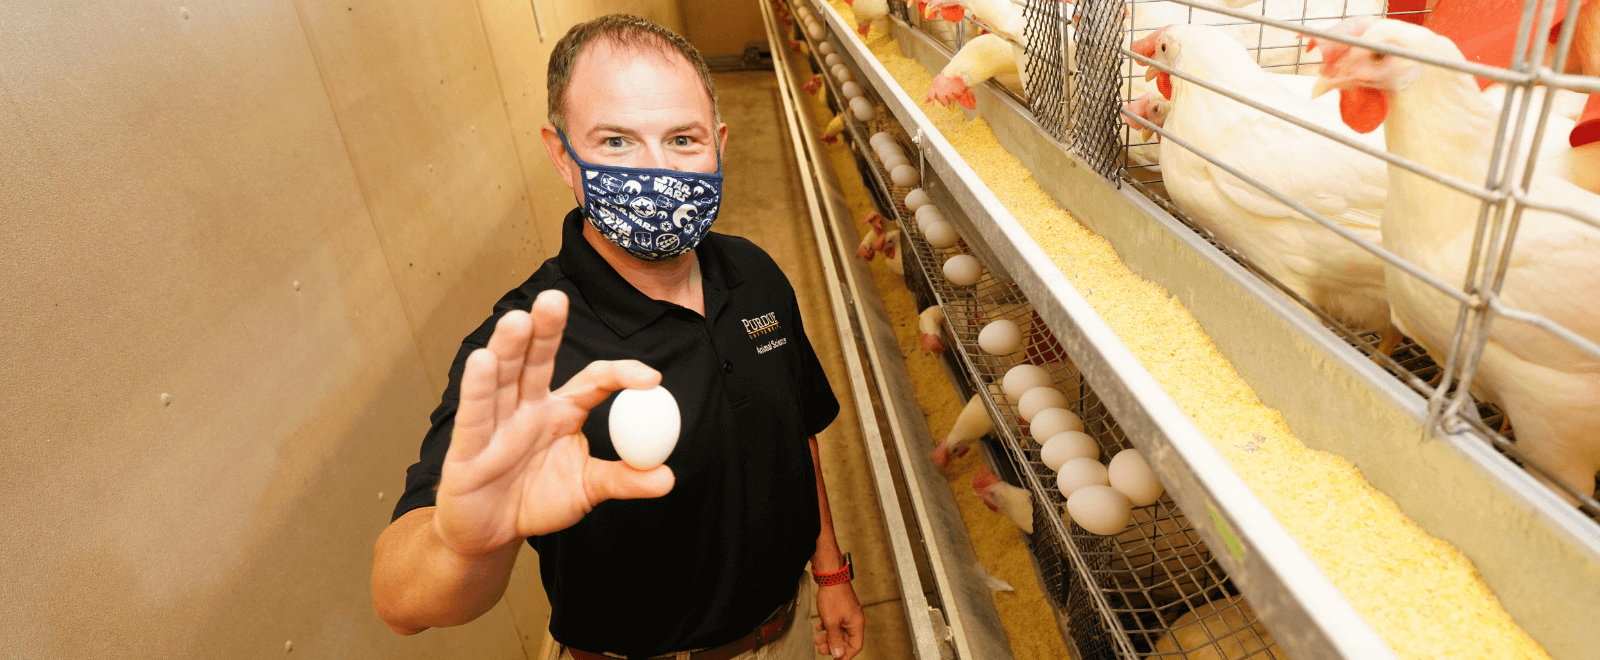 Holding egg with mask